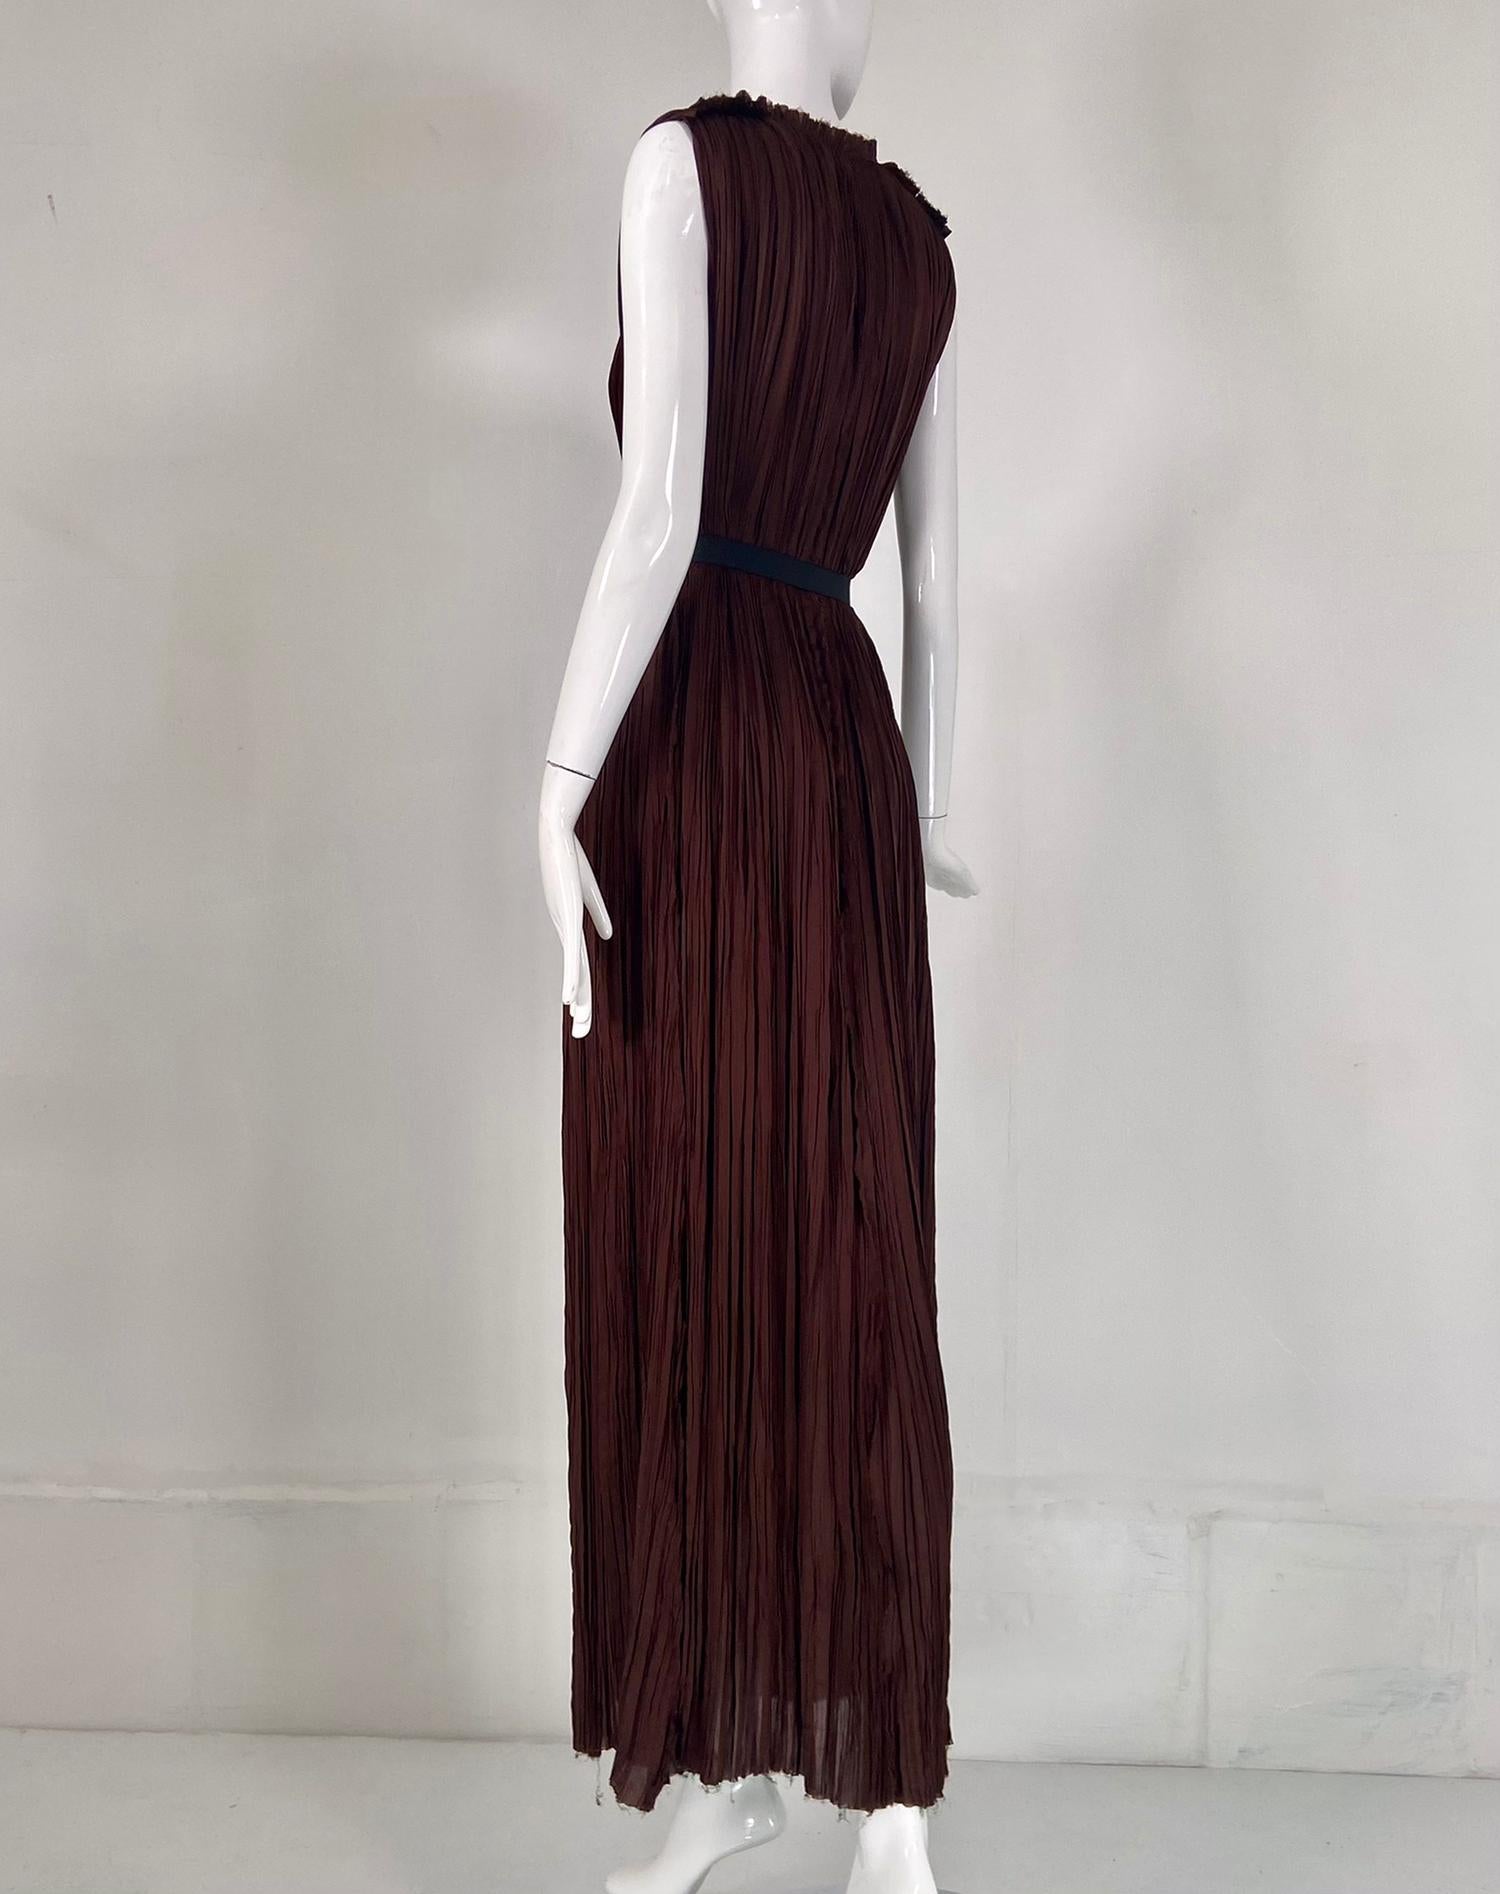 Lanvin Ete' 2005 Fortuny Pleated V Neck Maxi Dress Chocolate Brown Alber Elbaz 1